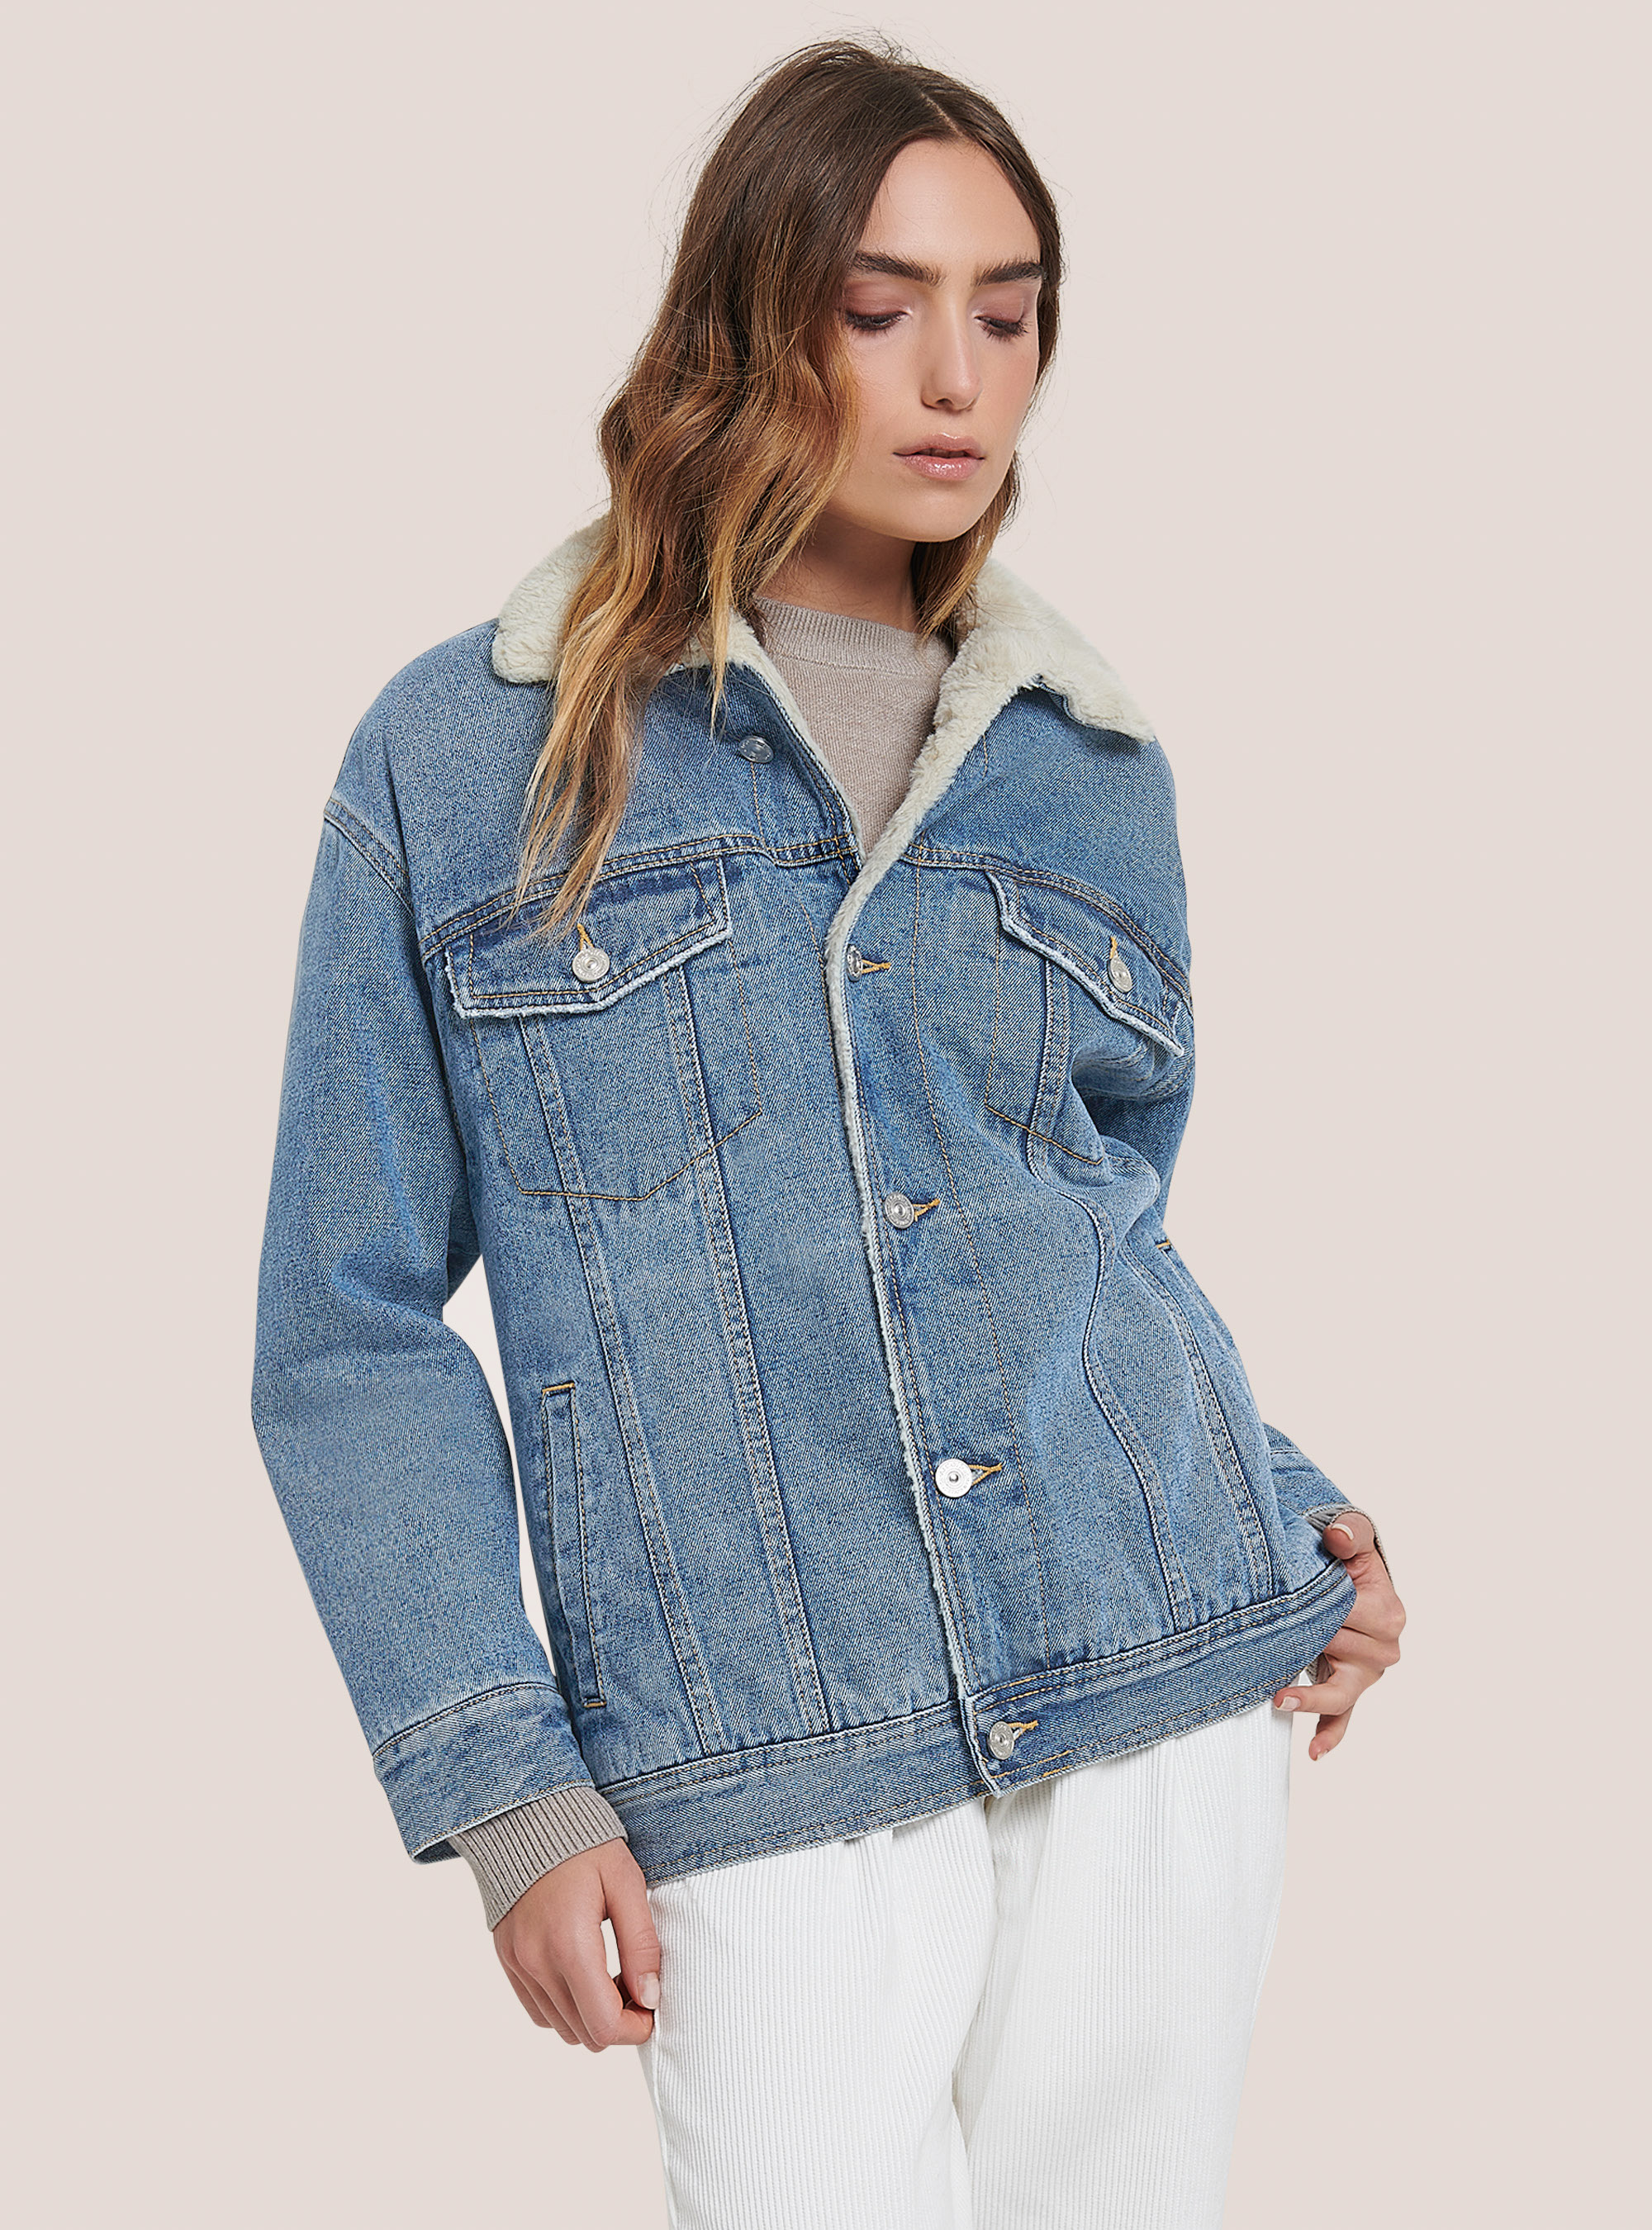 Denim jacket with faux fur lining and collar | Alcott | Women's Jackets